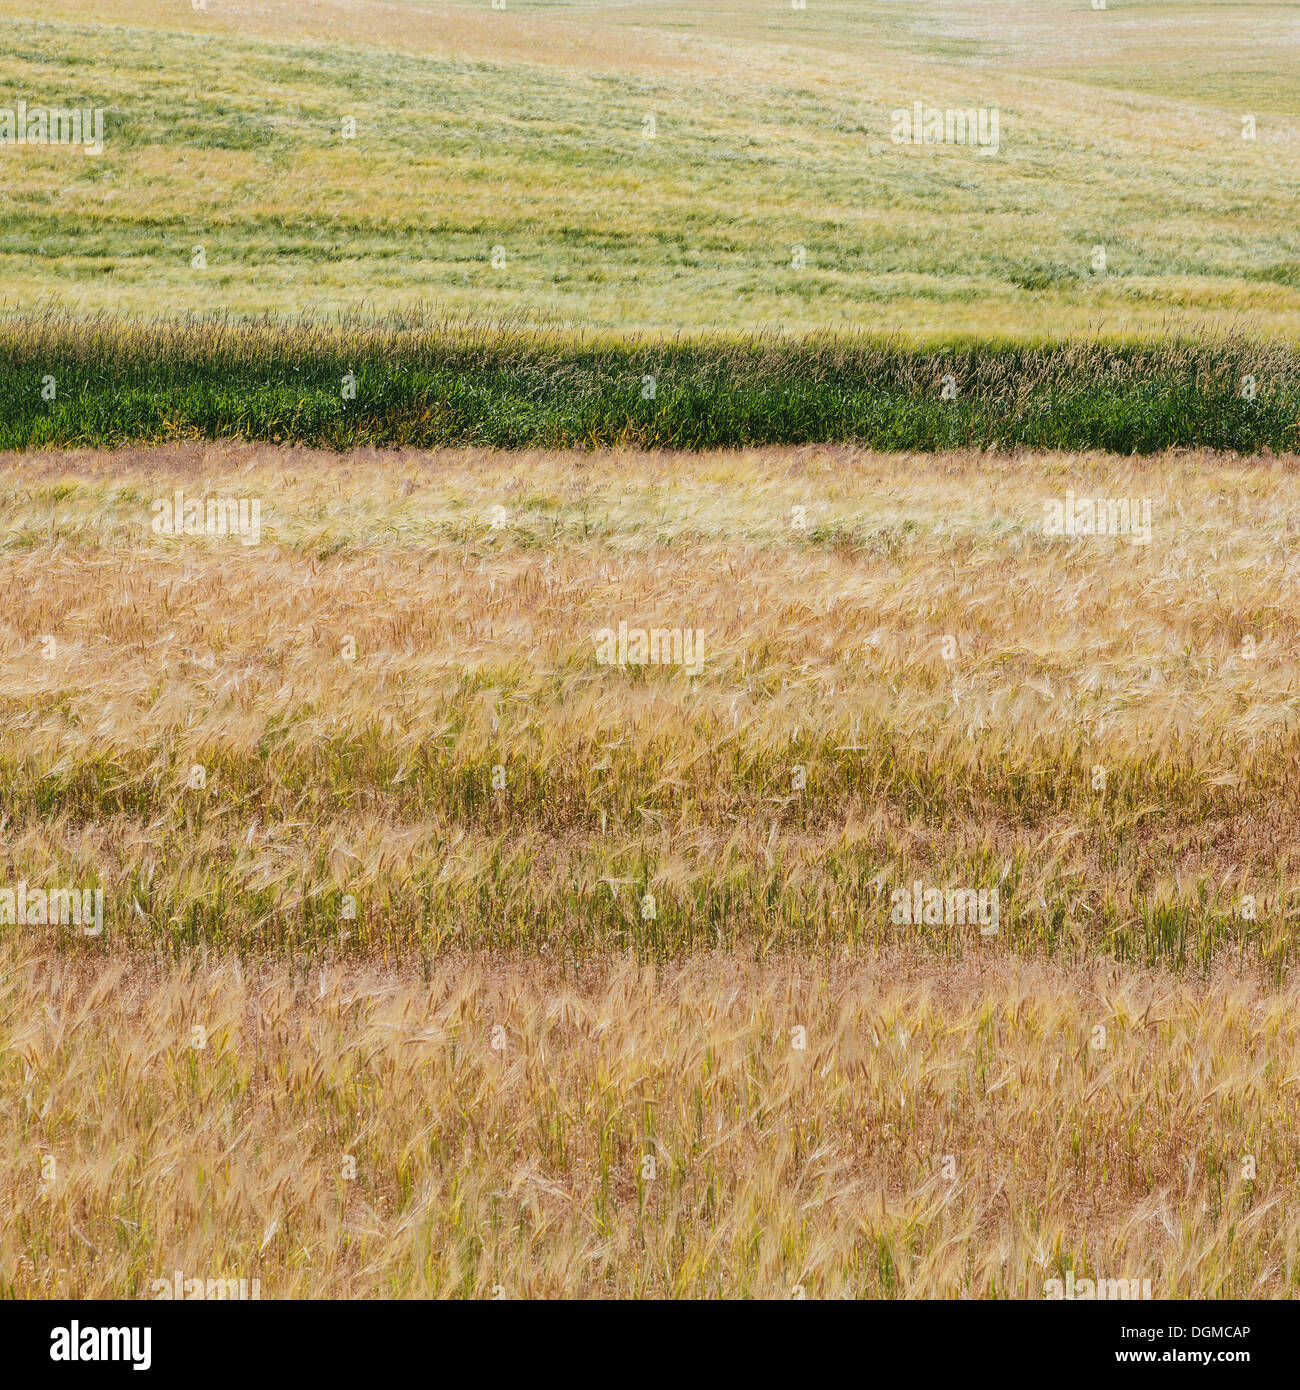 A wheat field with a ripening crop of wheat growing. Mixed crops, wheat and grasses. Wind blowing over the top of the crops. Stock Photo